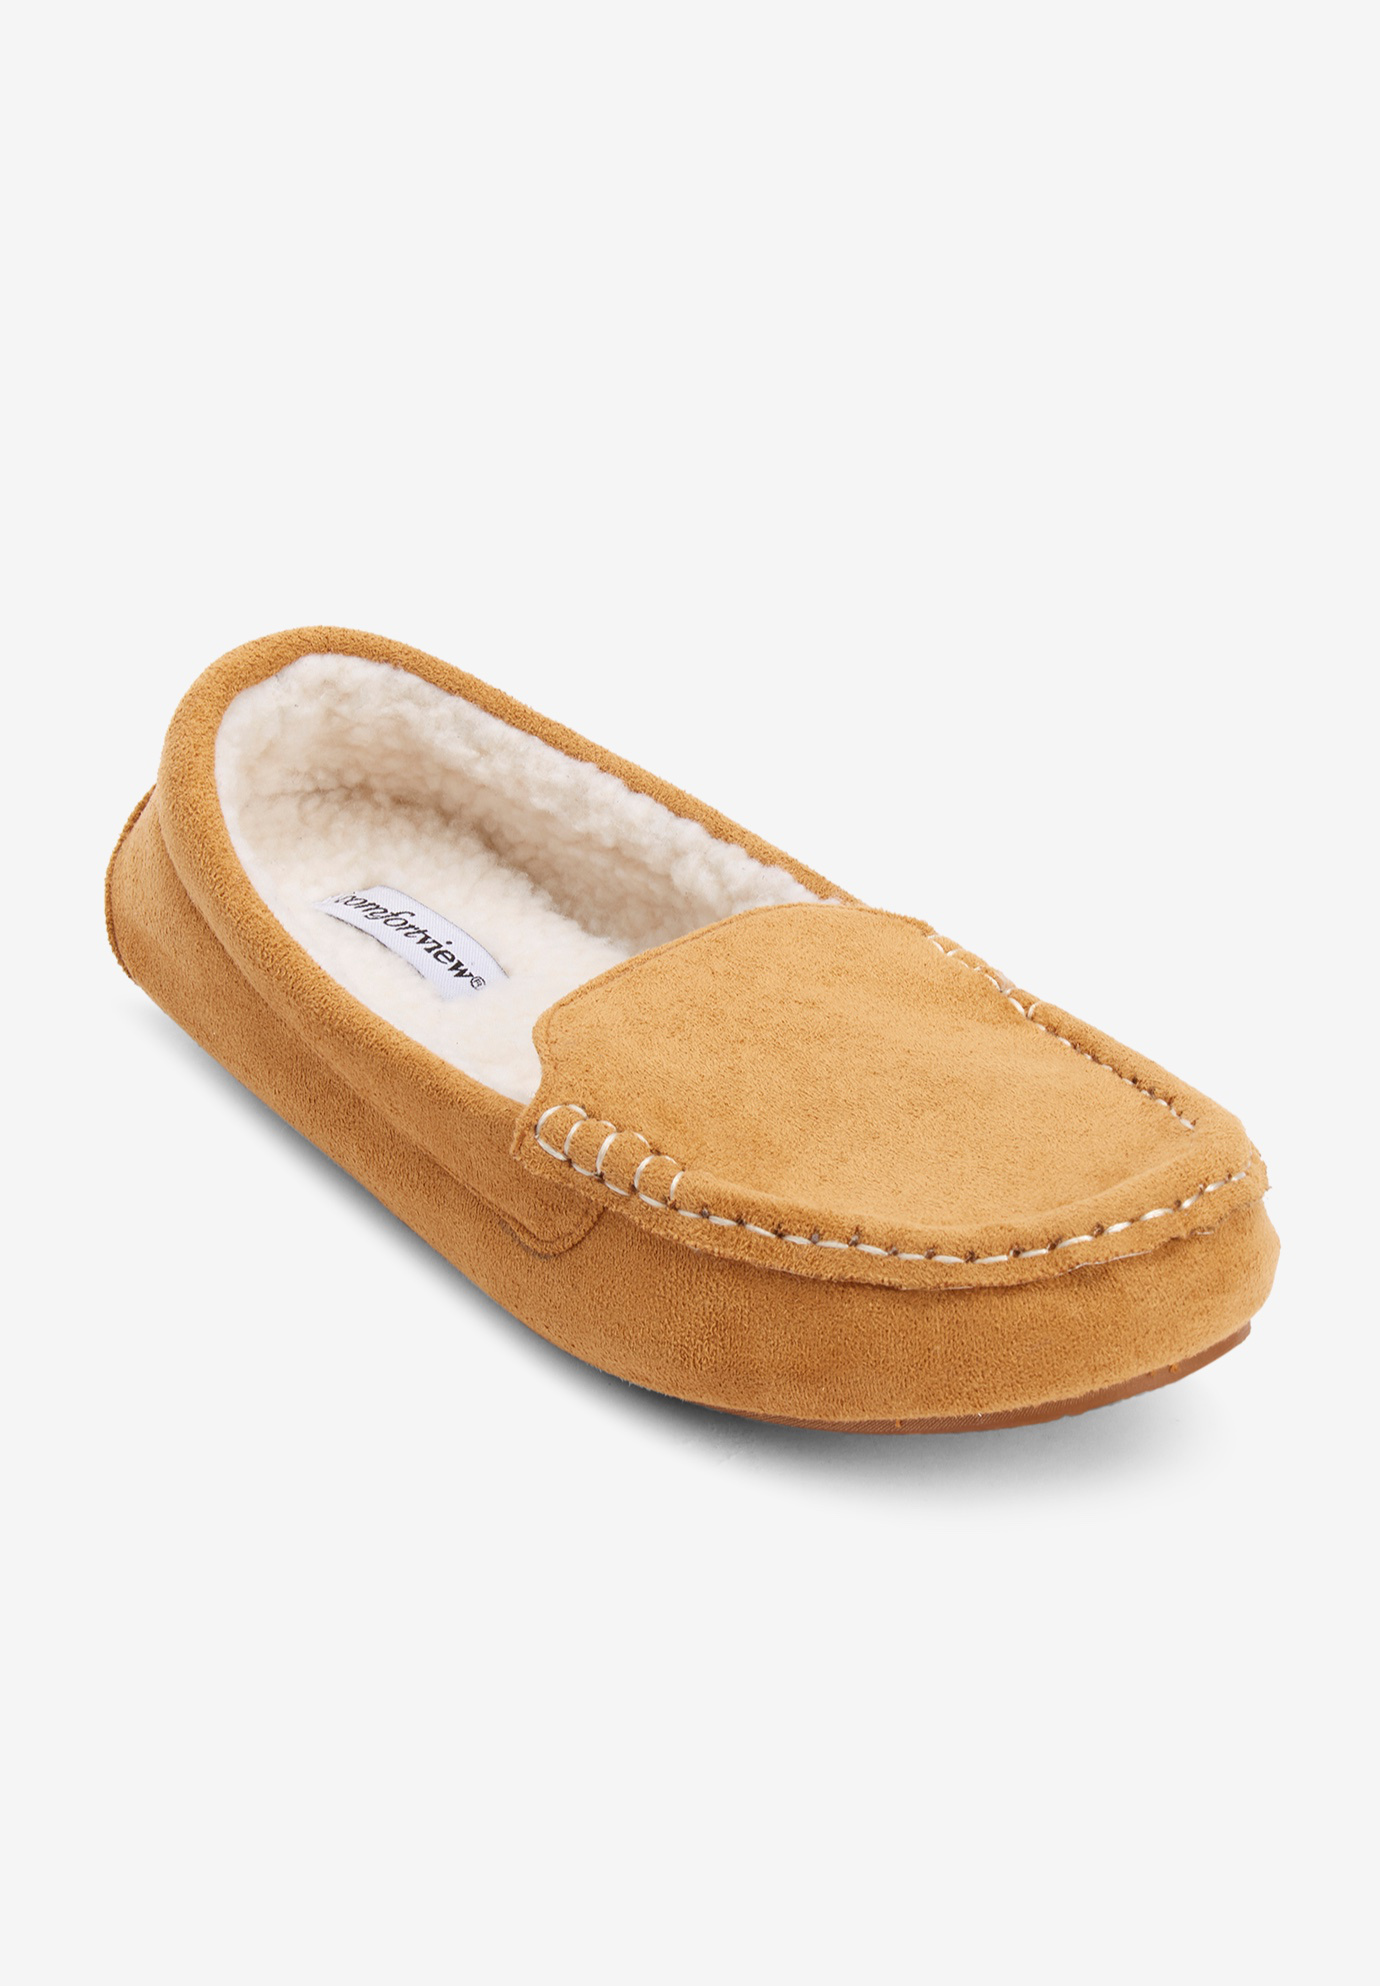 The Ivory Slipper by Comfortview, 